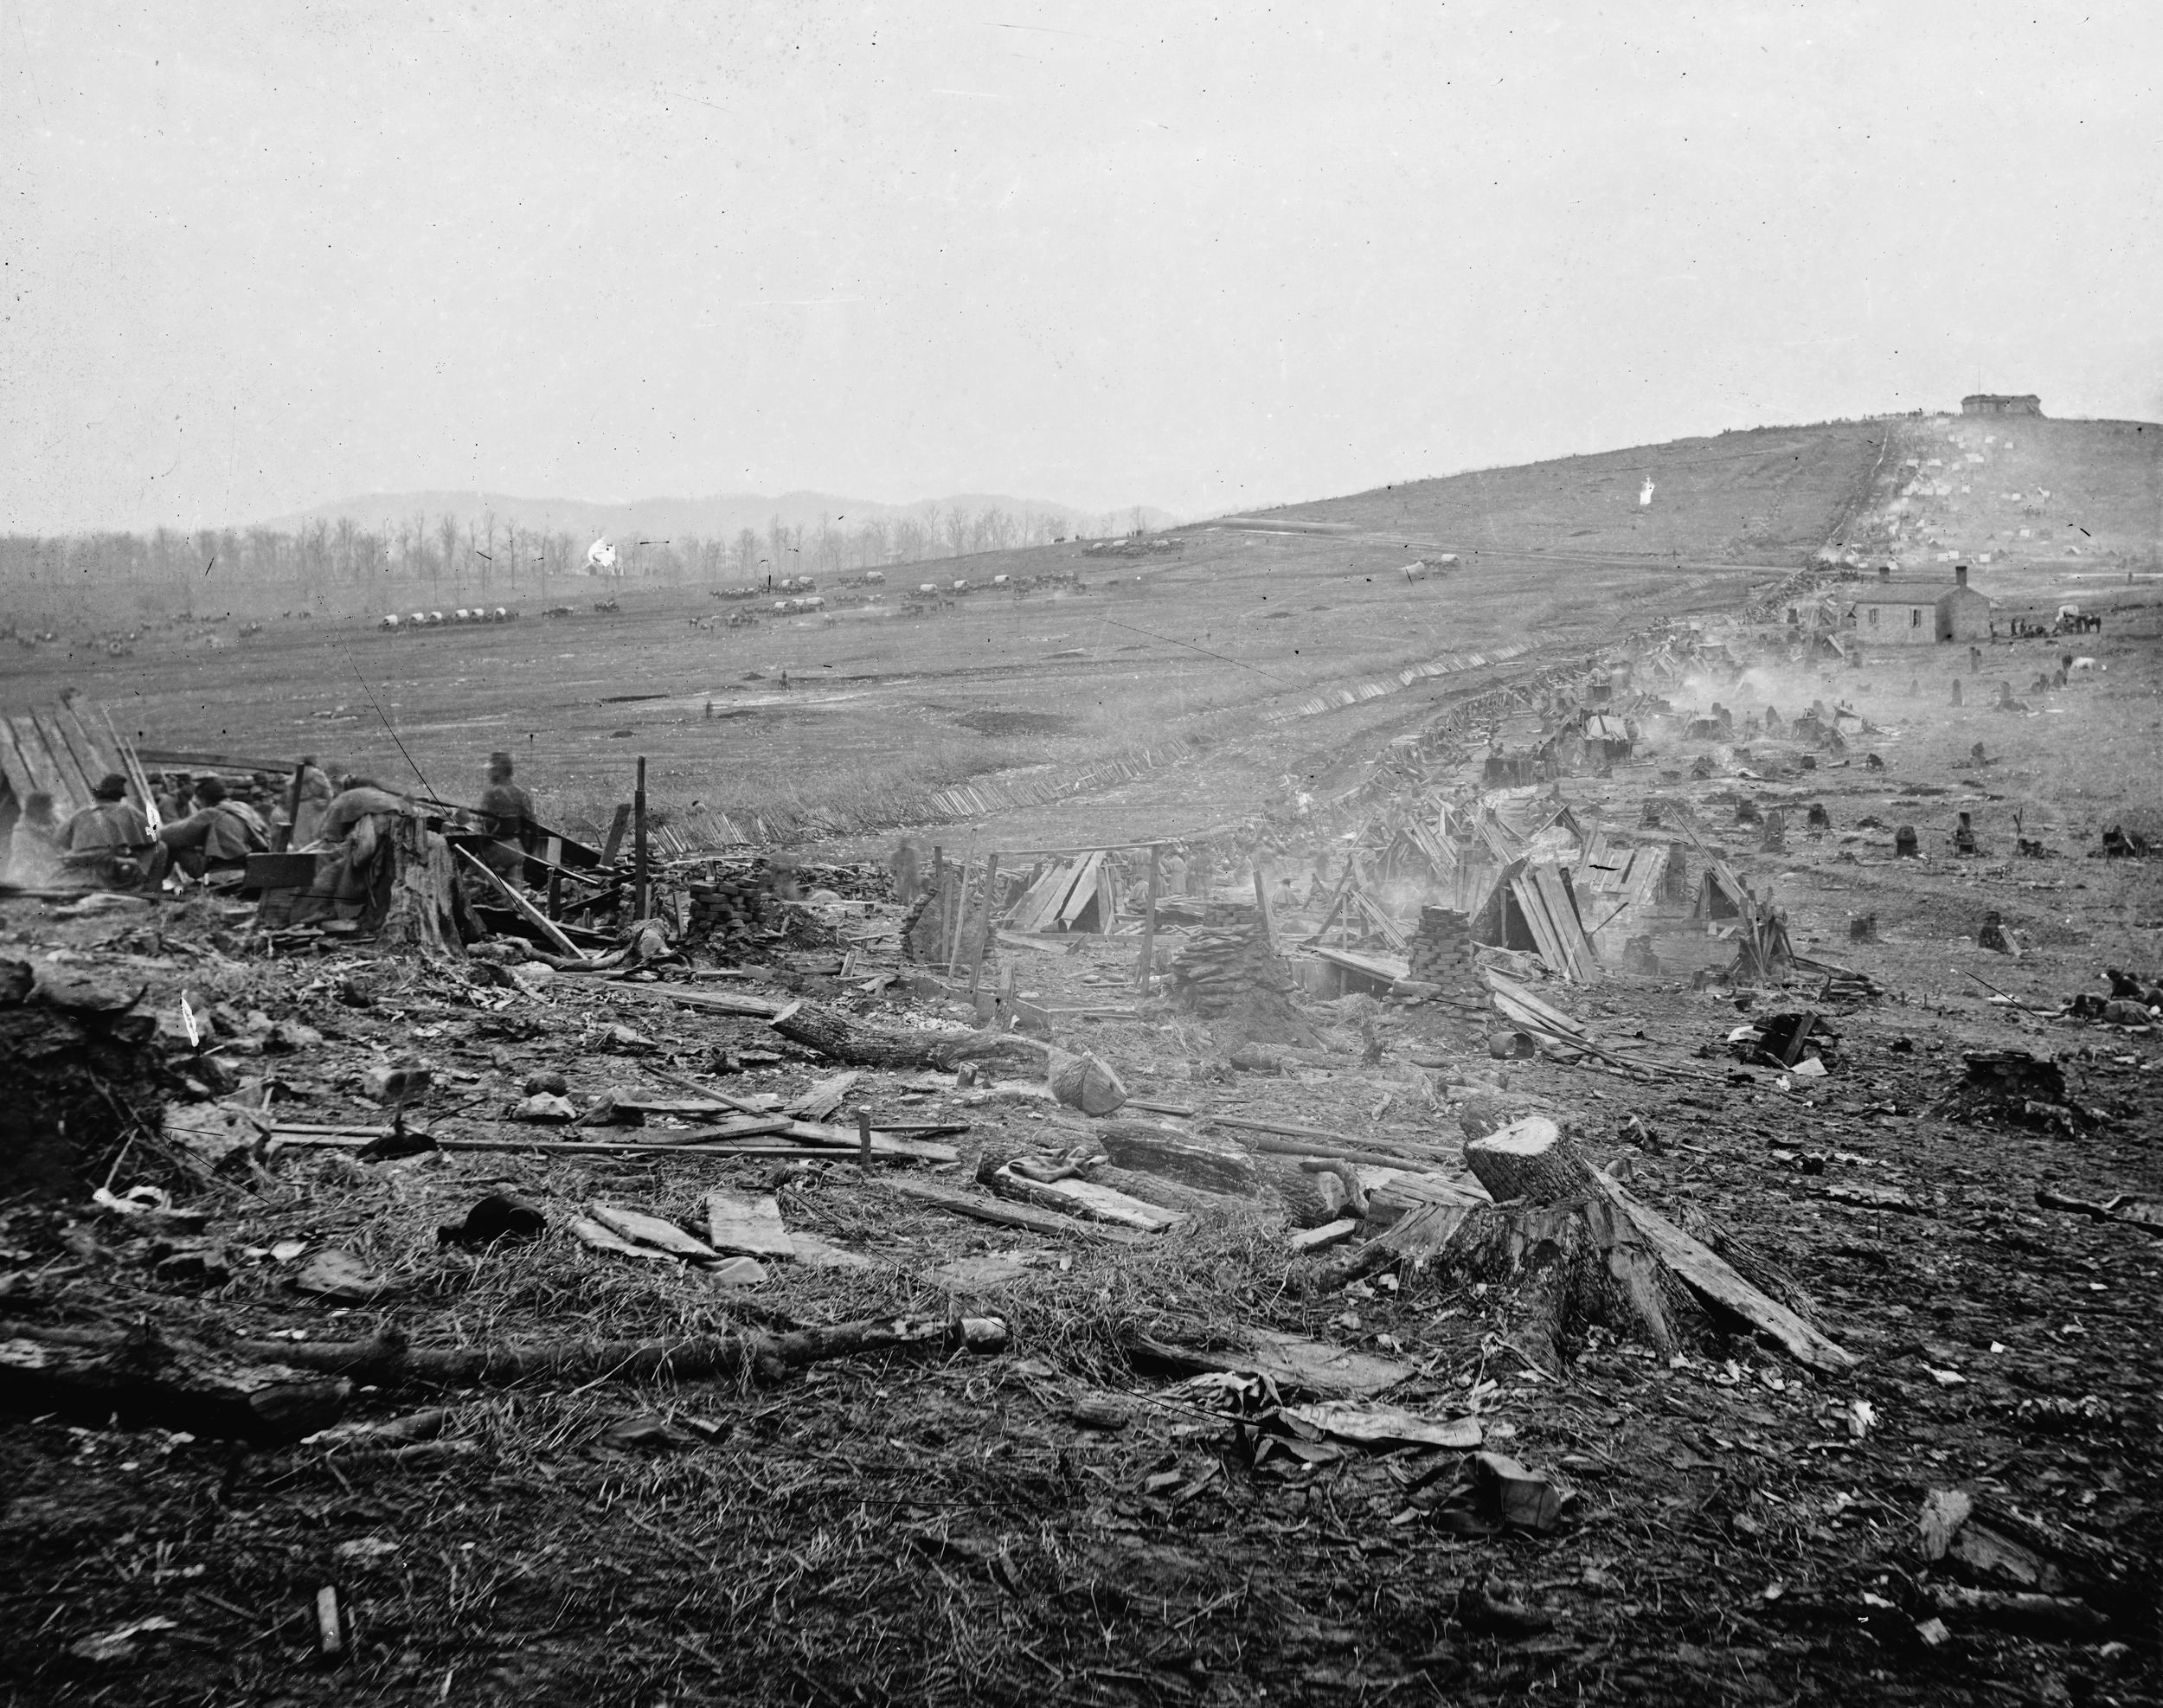 Extensive Federal defenses, including trenches, earthworks, and abatis, made Nashville one of the most heavily fortified cities on the American continent in the fall of 1864.